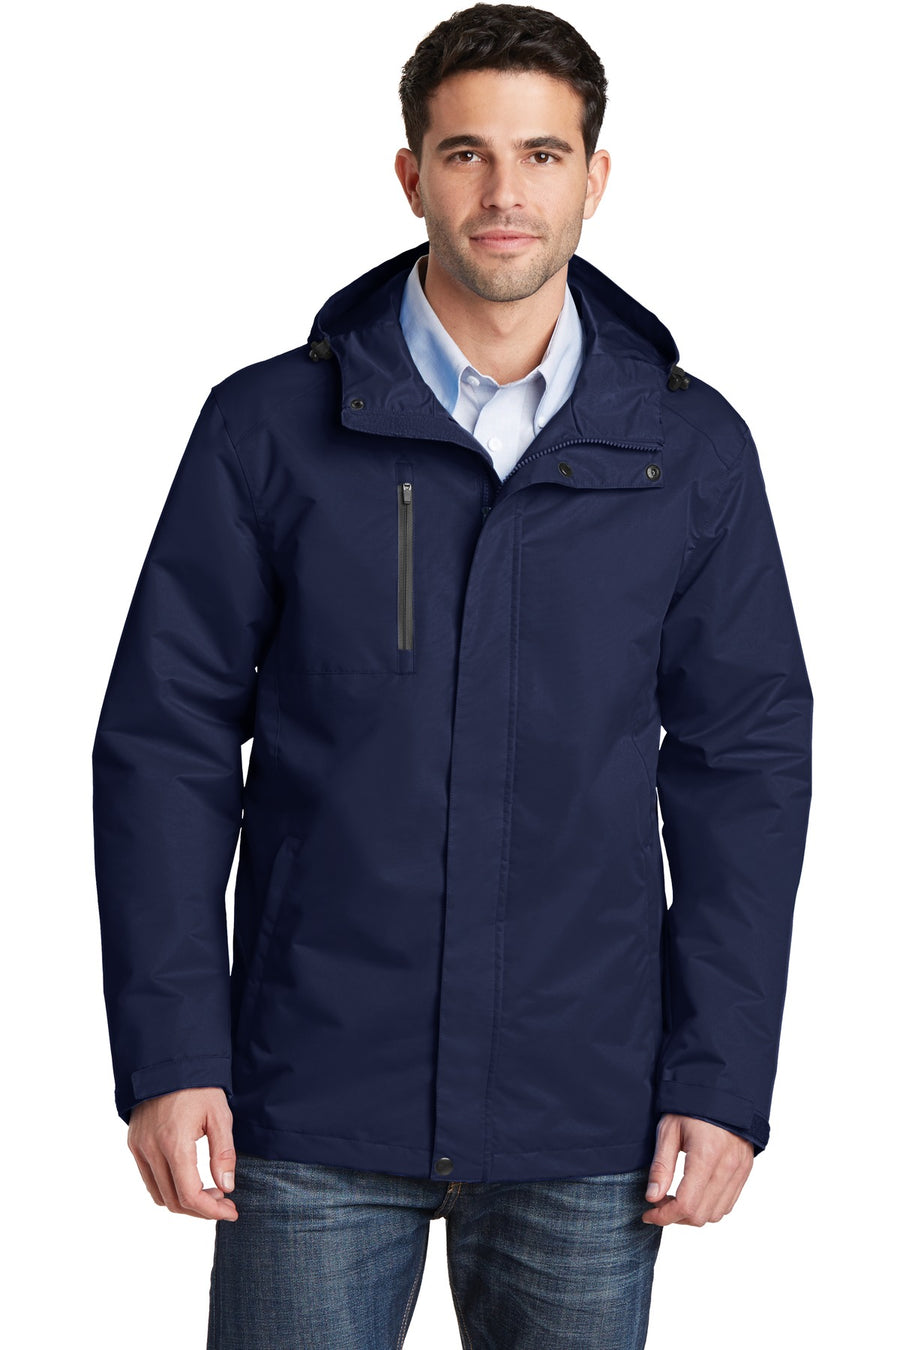 Port Authority All-Conditions Jacket.